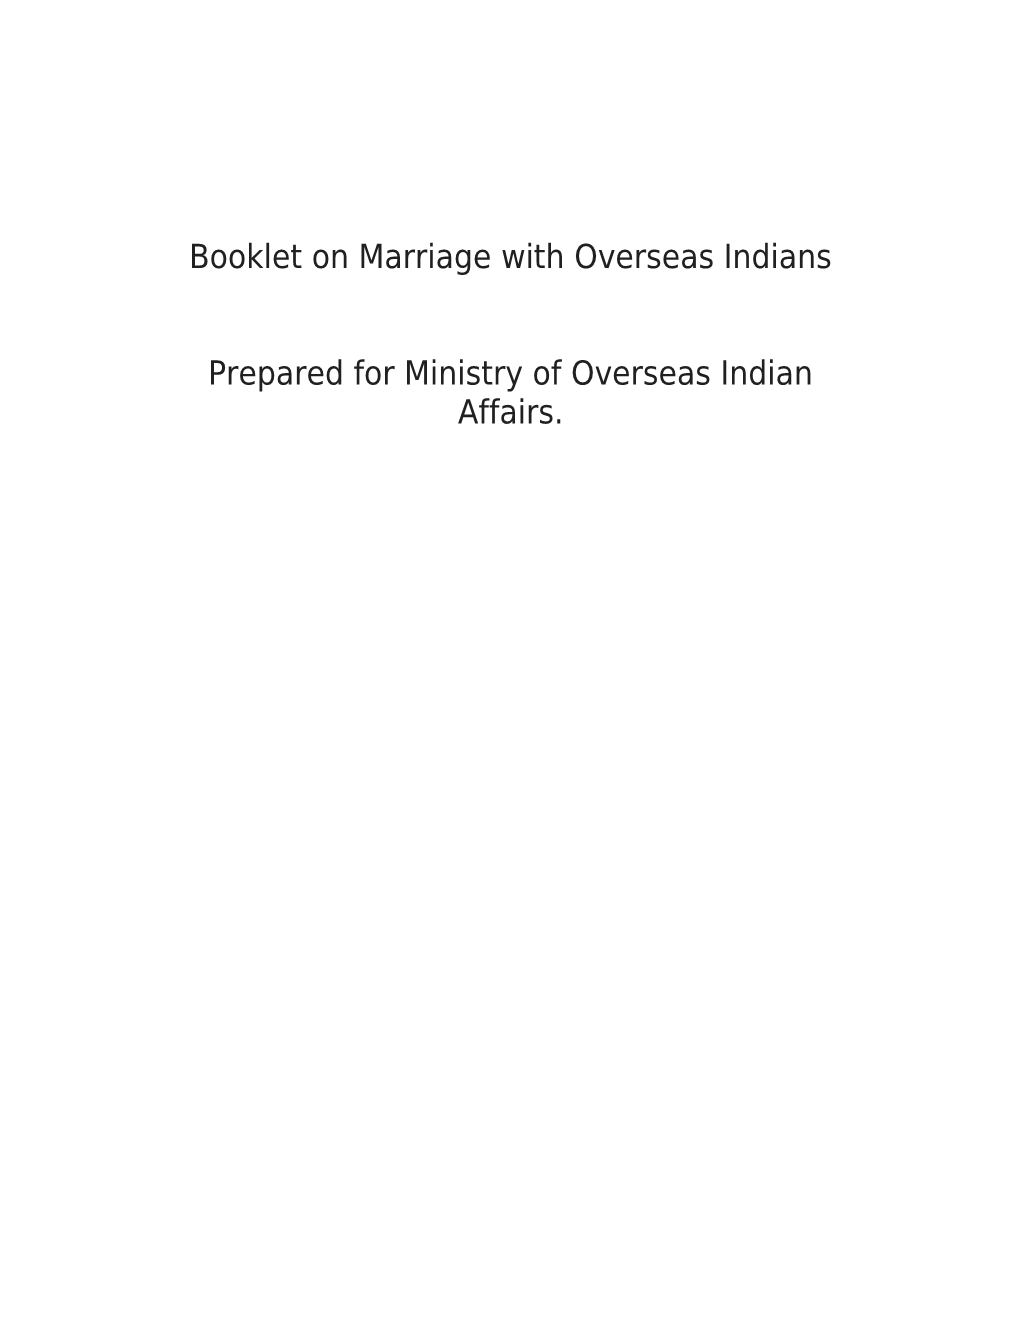 Booklet on Marriage with Overseas Indians